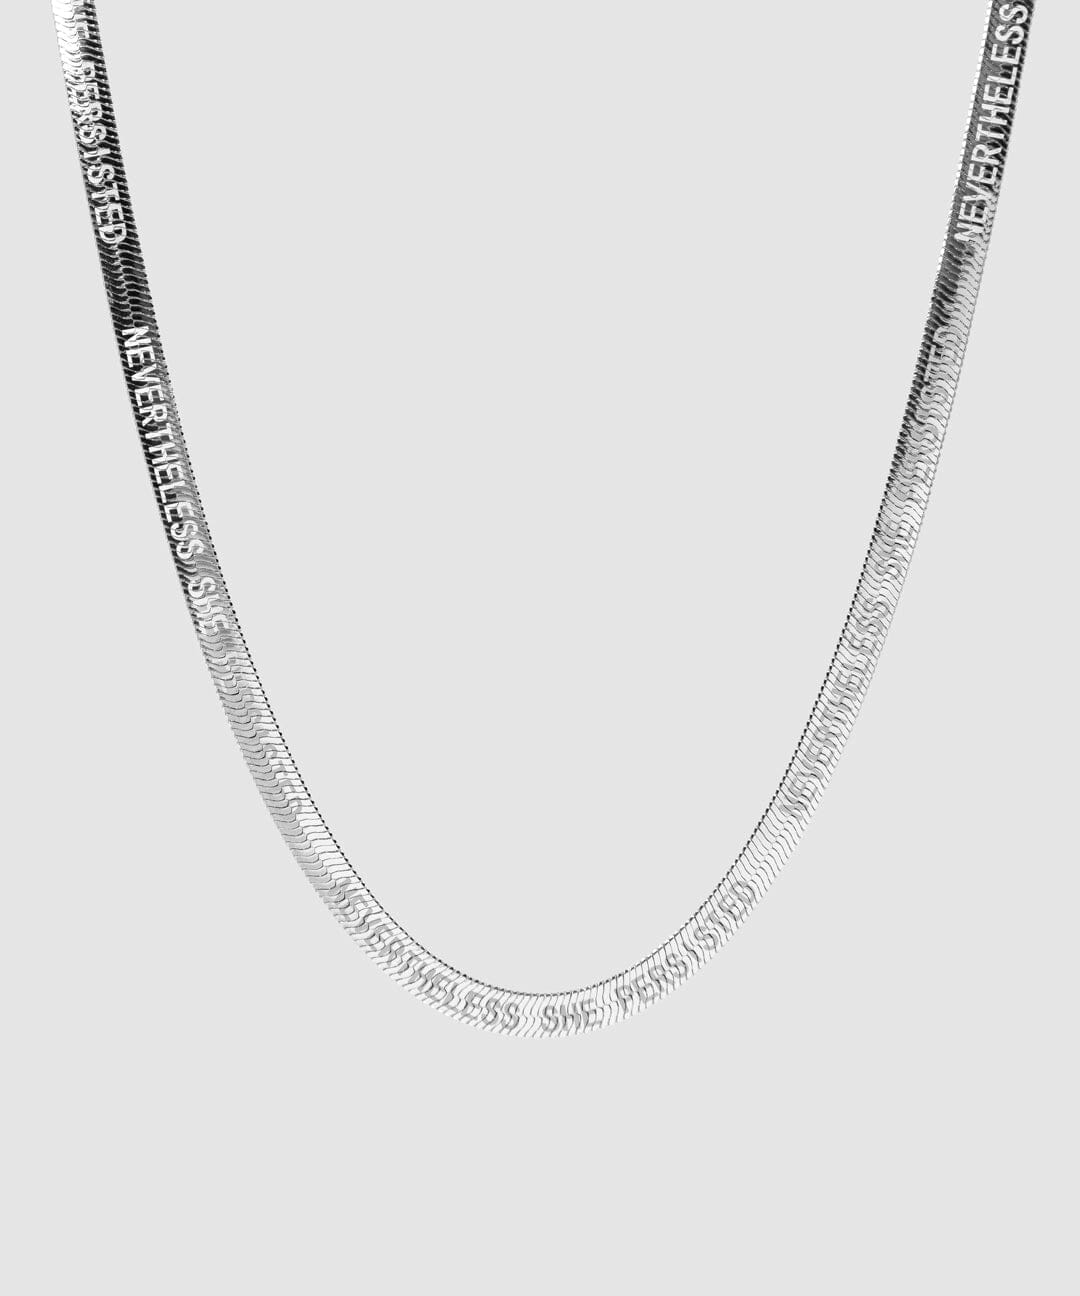 Silver Herringbone Necklace Necklaces Borun Silver NEVERTHELESS SHE PERSISTED 